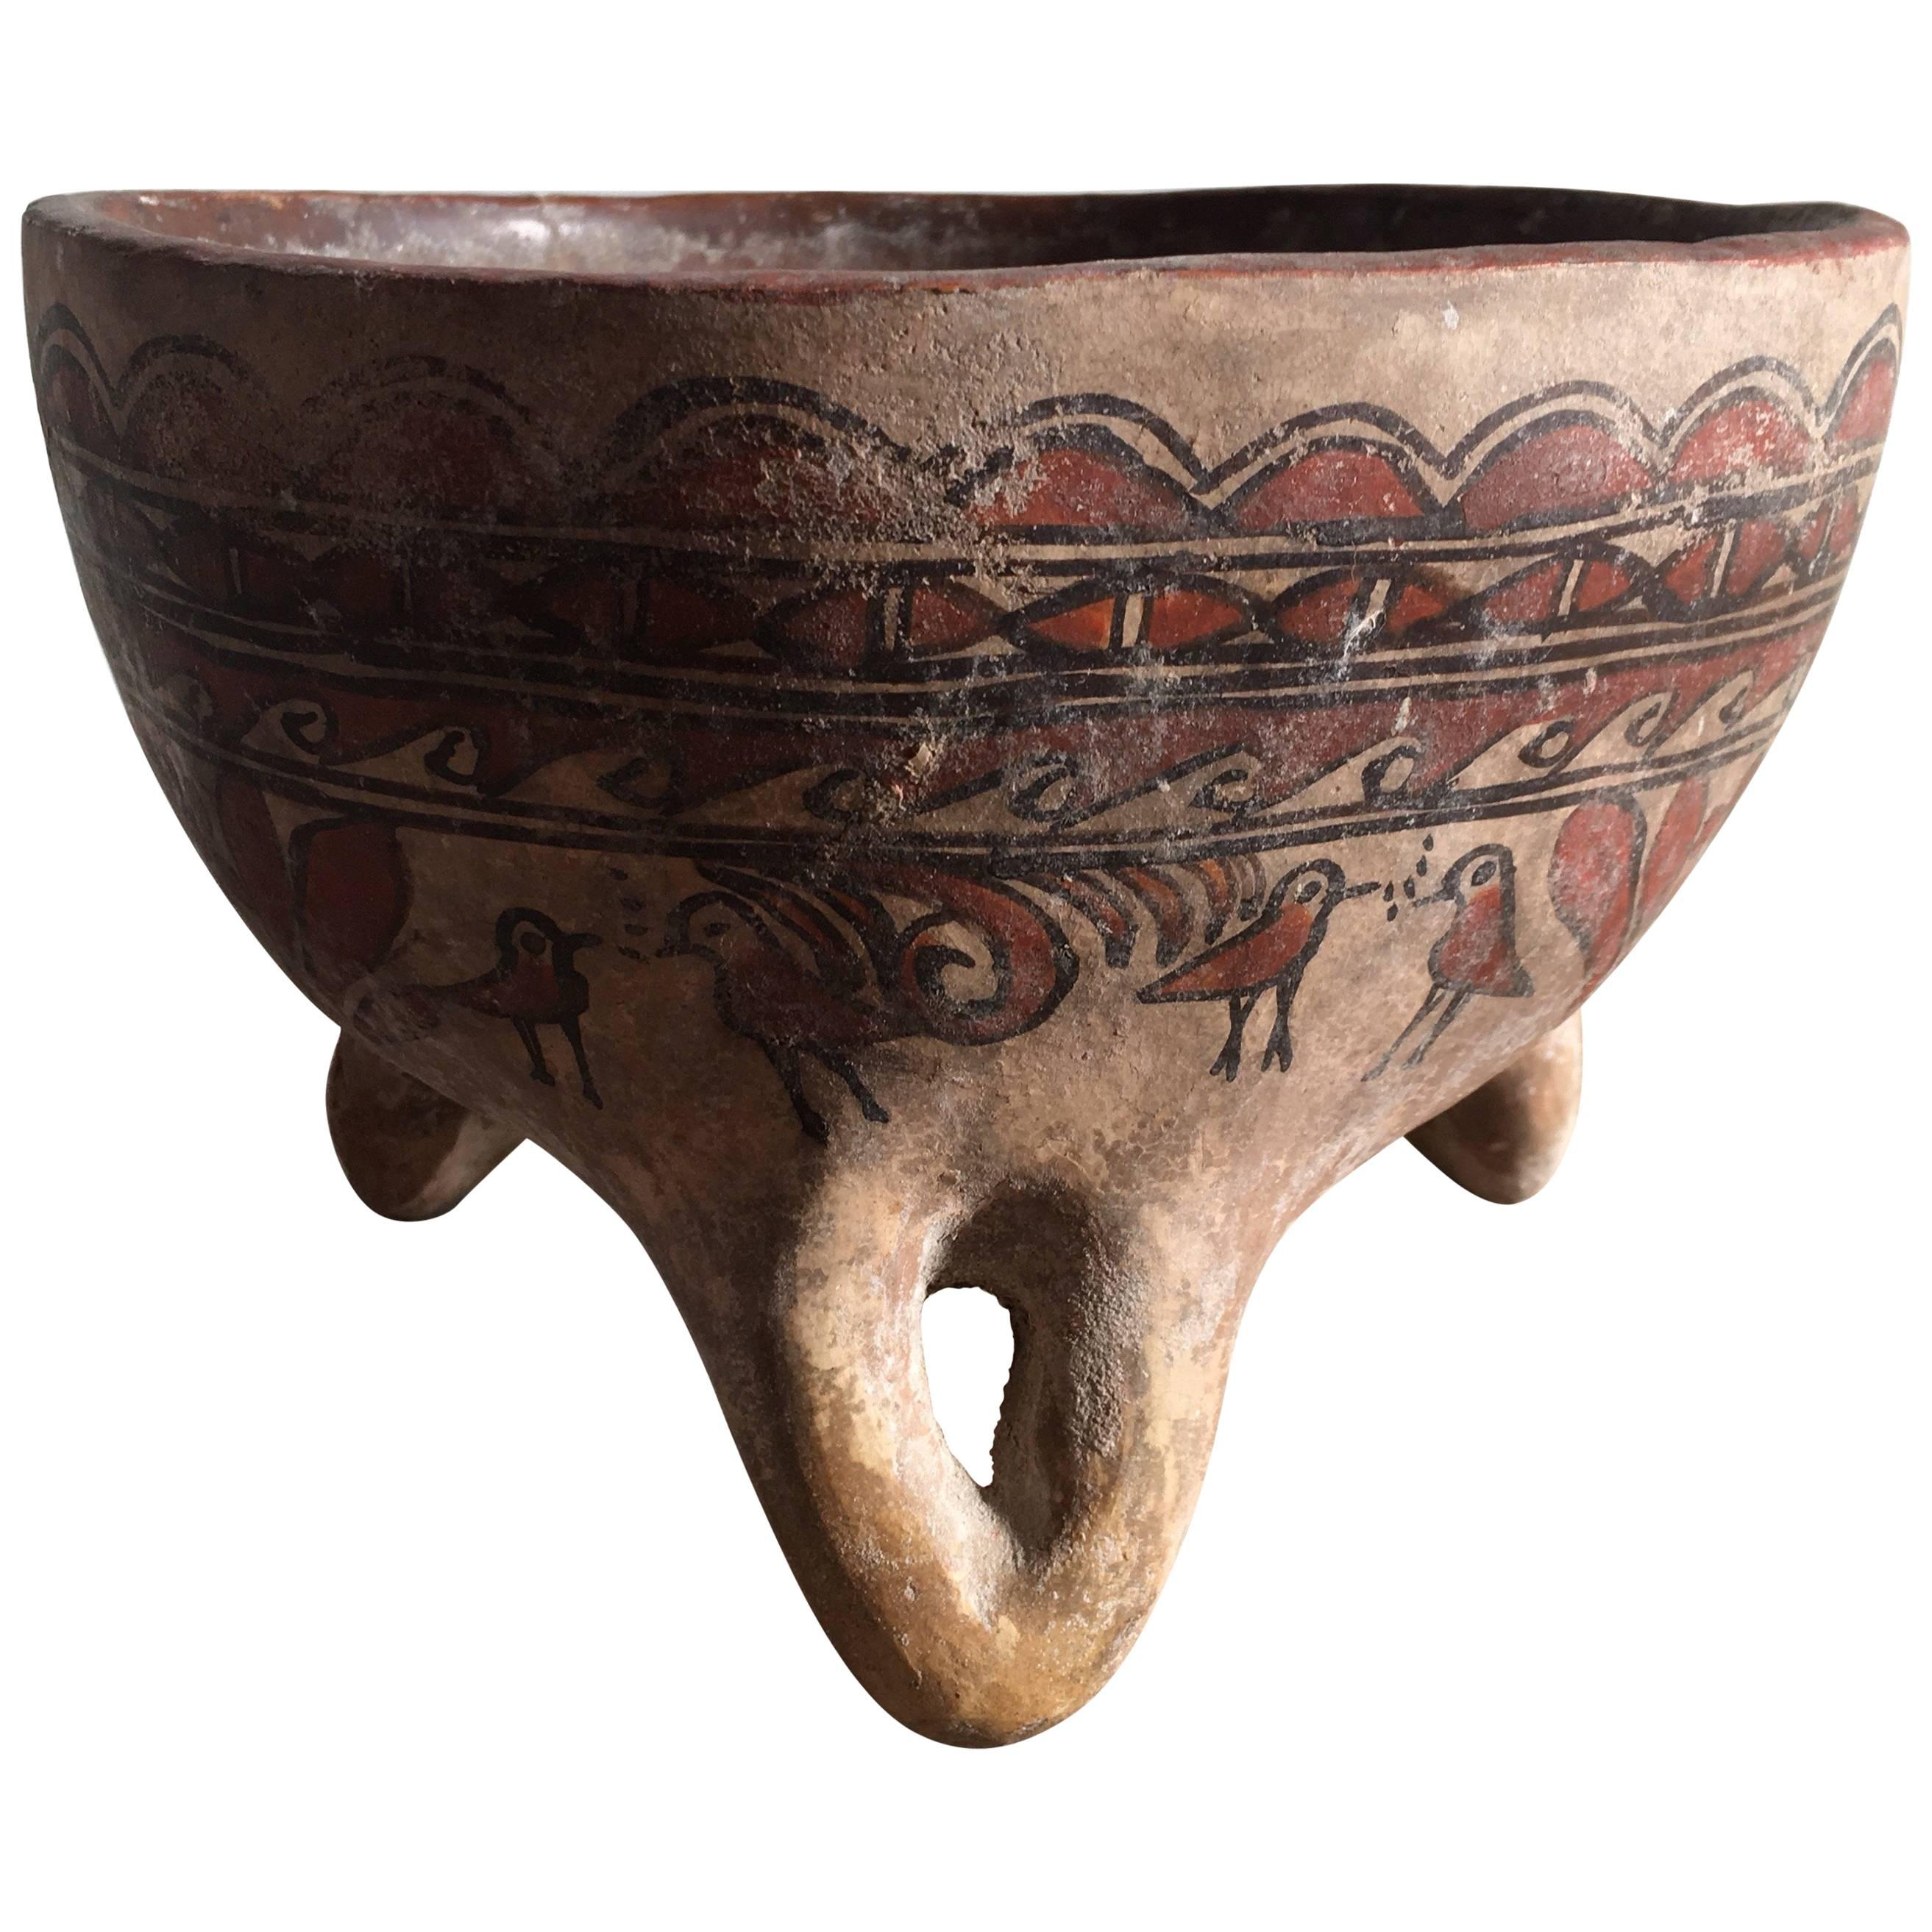 Ceramic Bowl with Primitive Design Work from Mexico